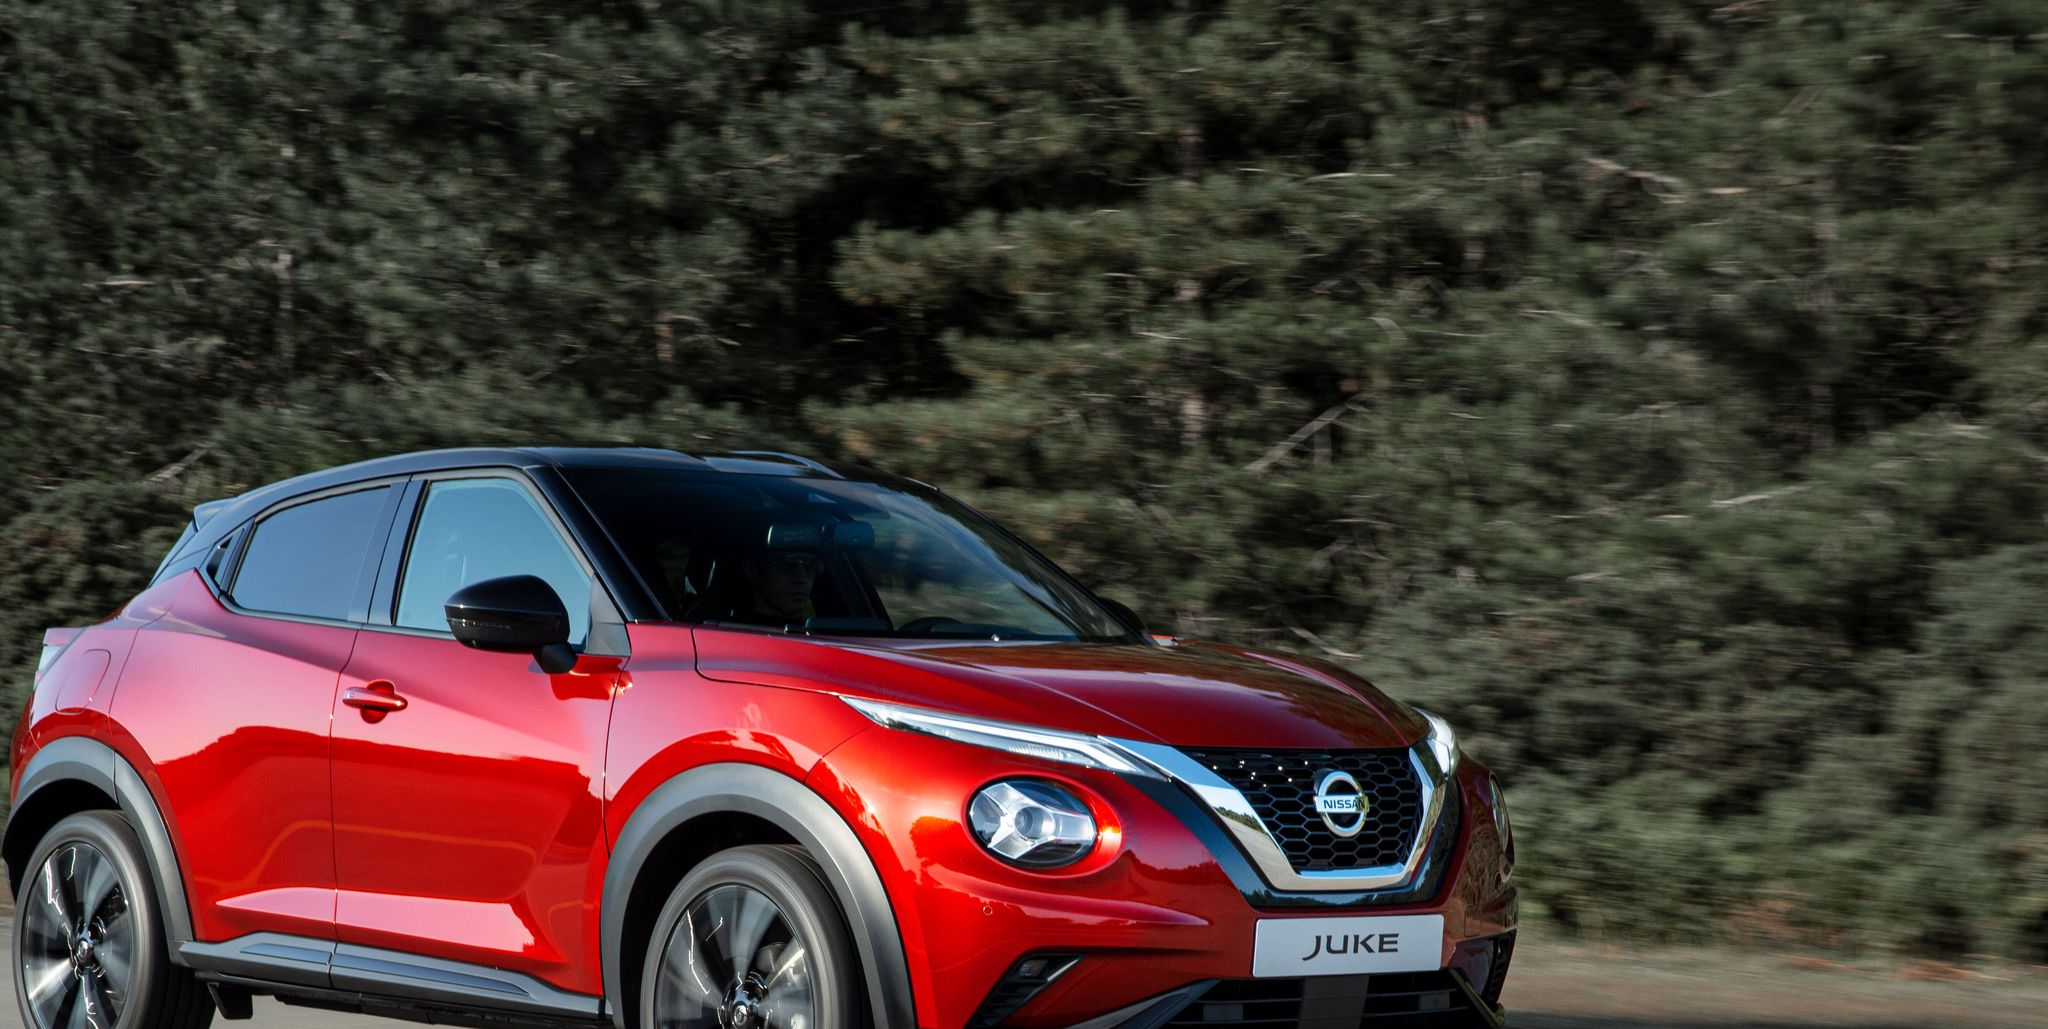 https://hips.hearstapps.com/hmg-prod/images/sep-3-6pm-cet-new-nissan-juke-unveil-dynamic-outdoor-3-1567529212.jpg?crop=0.823xw:0.620xh;0,0.153xh&resize=2048:*